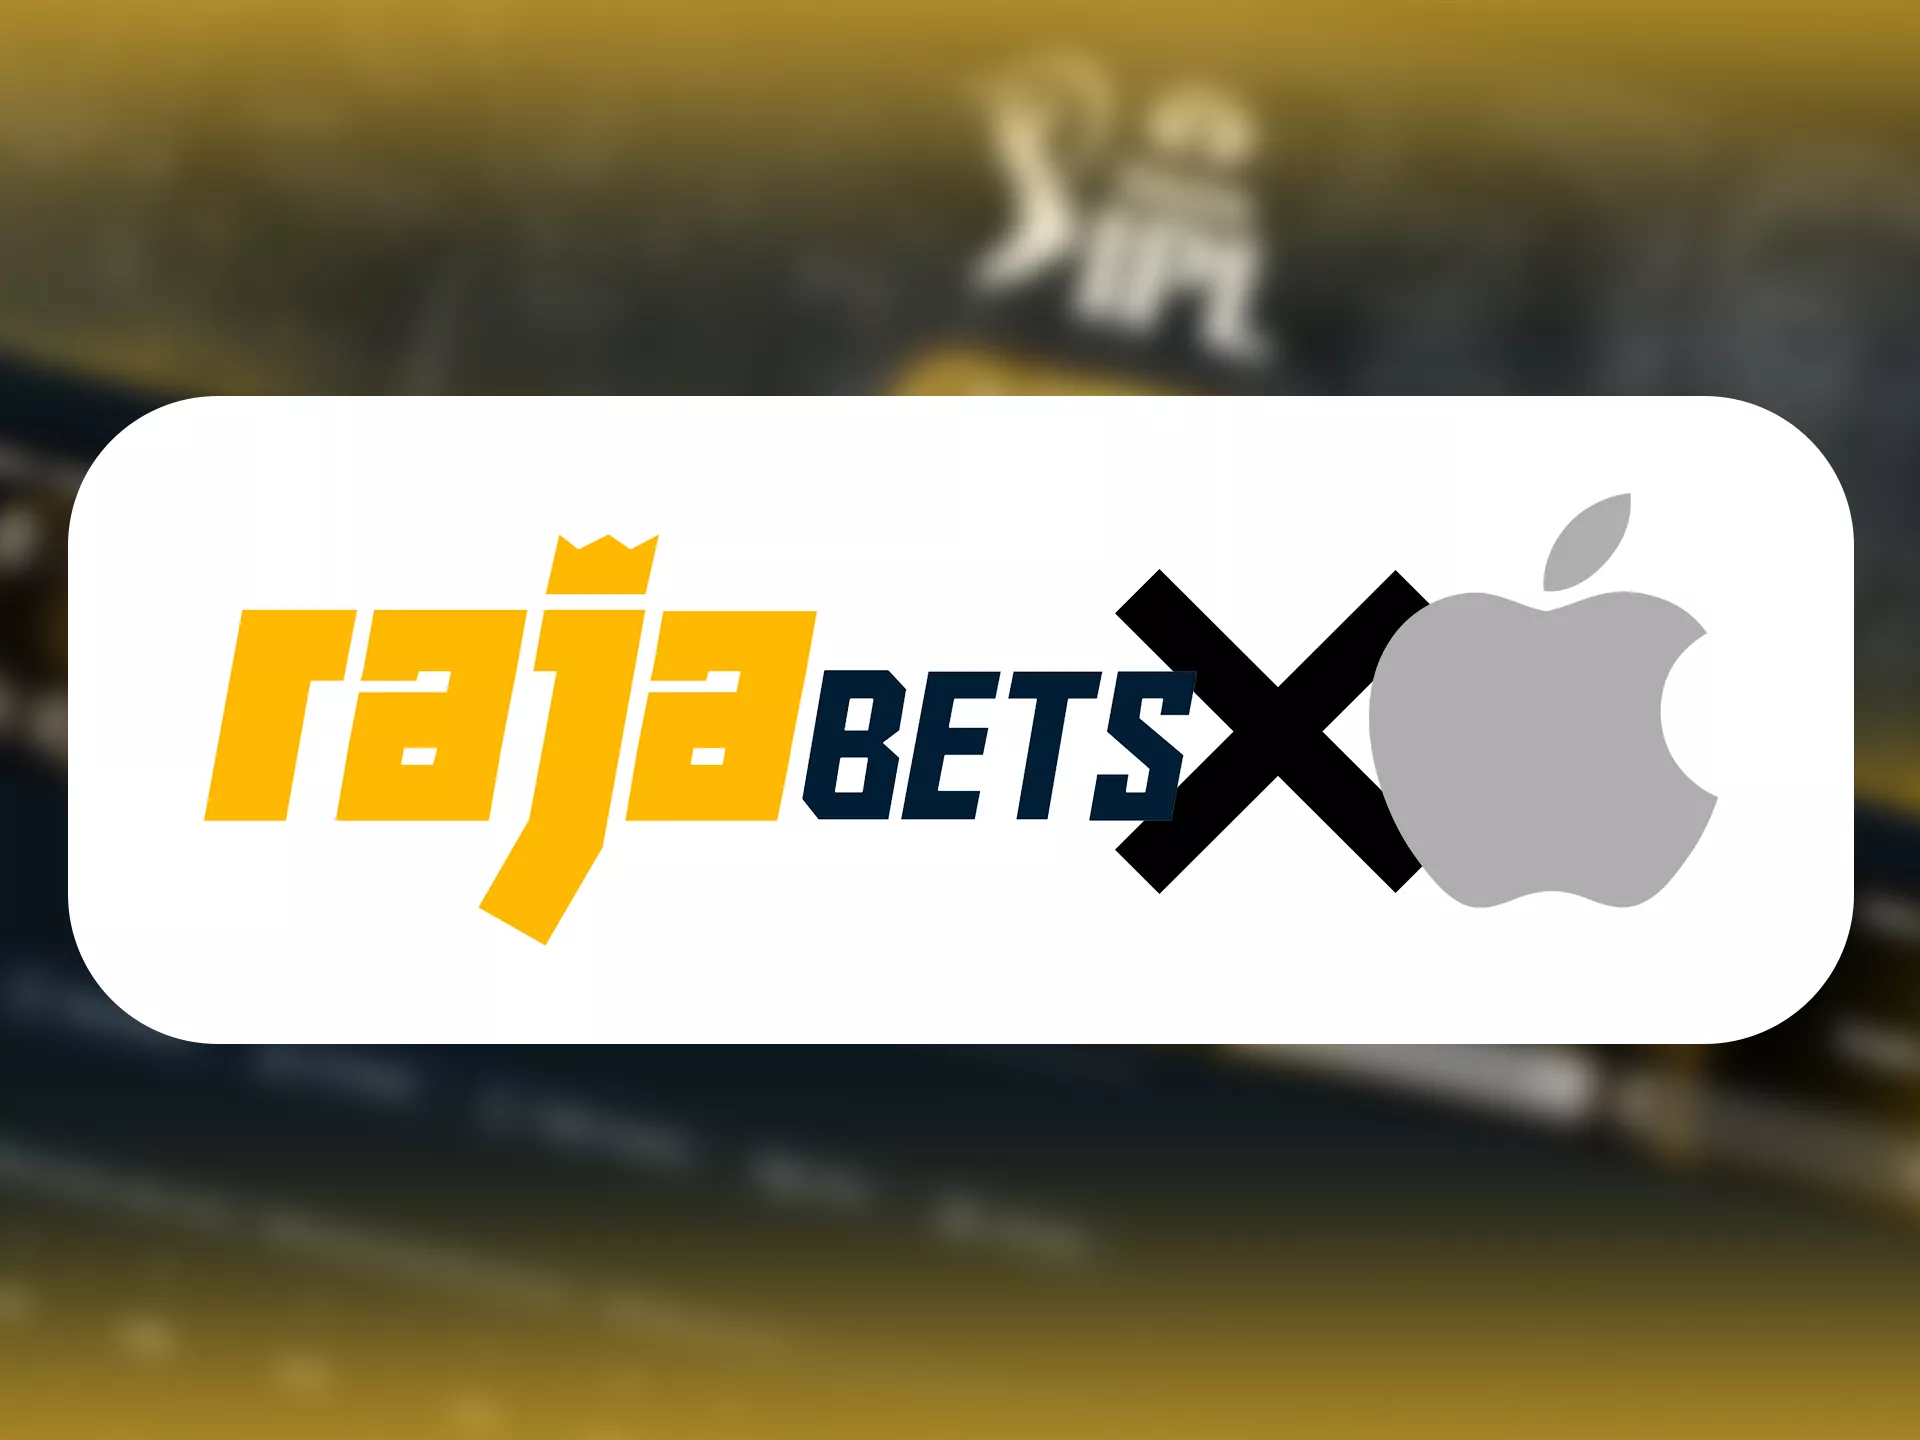 You can download Rajabets app on various iOS devices.